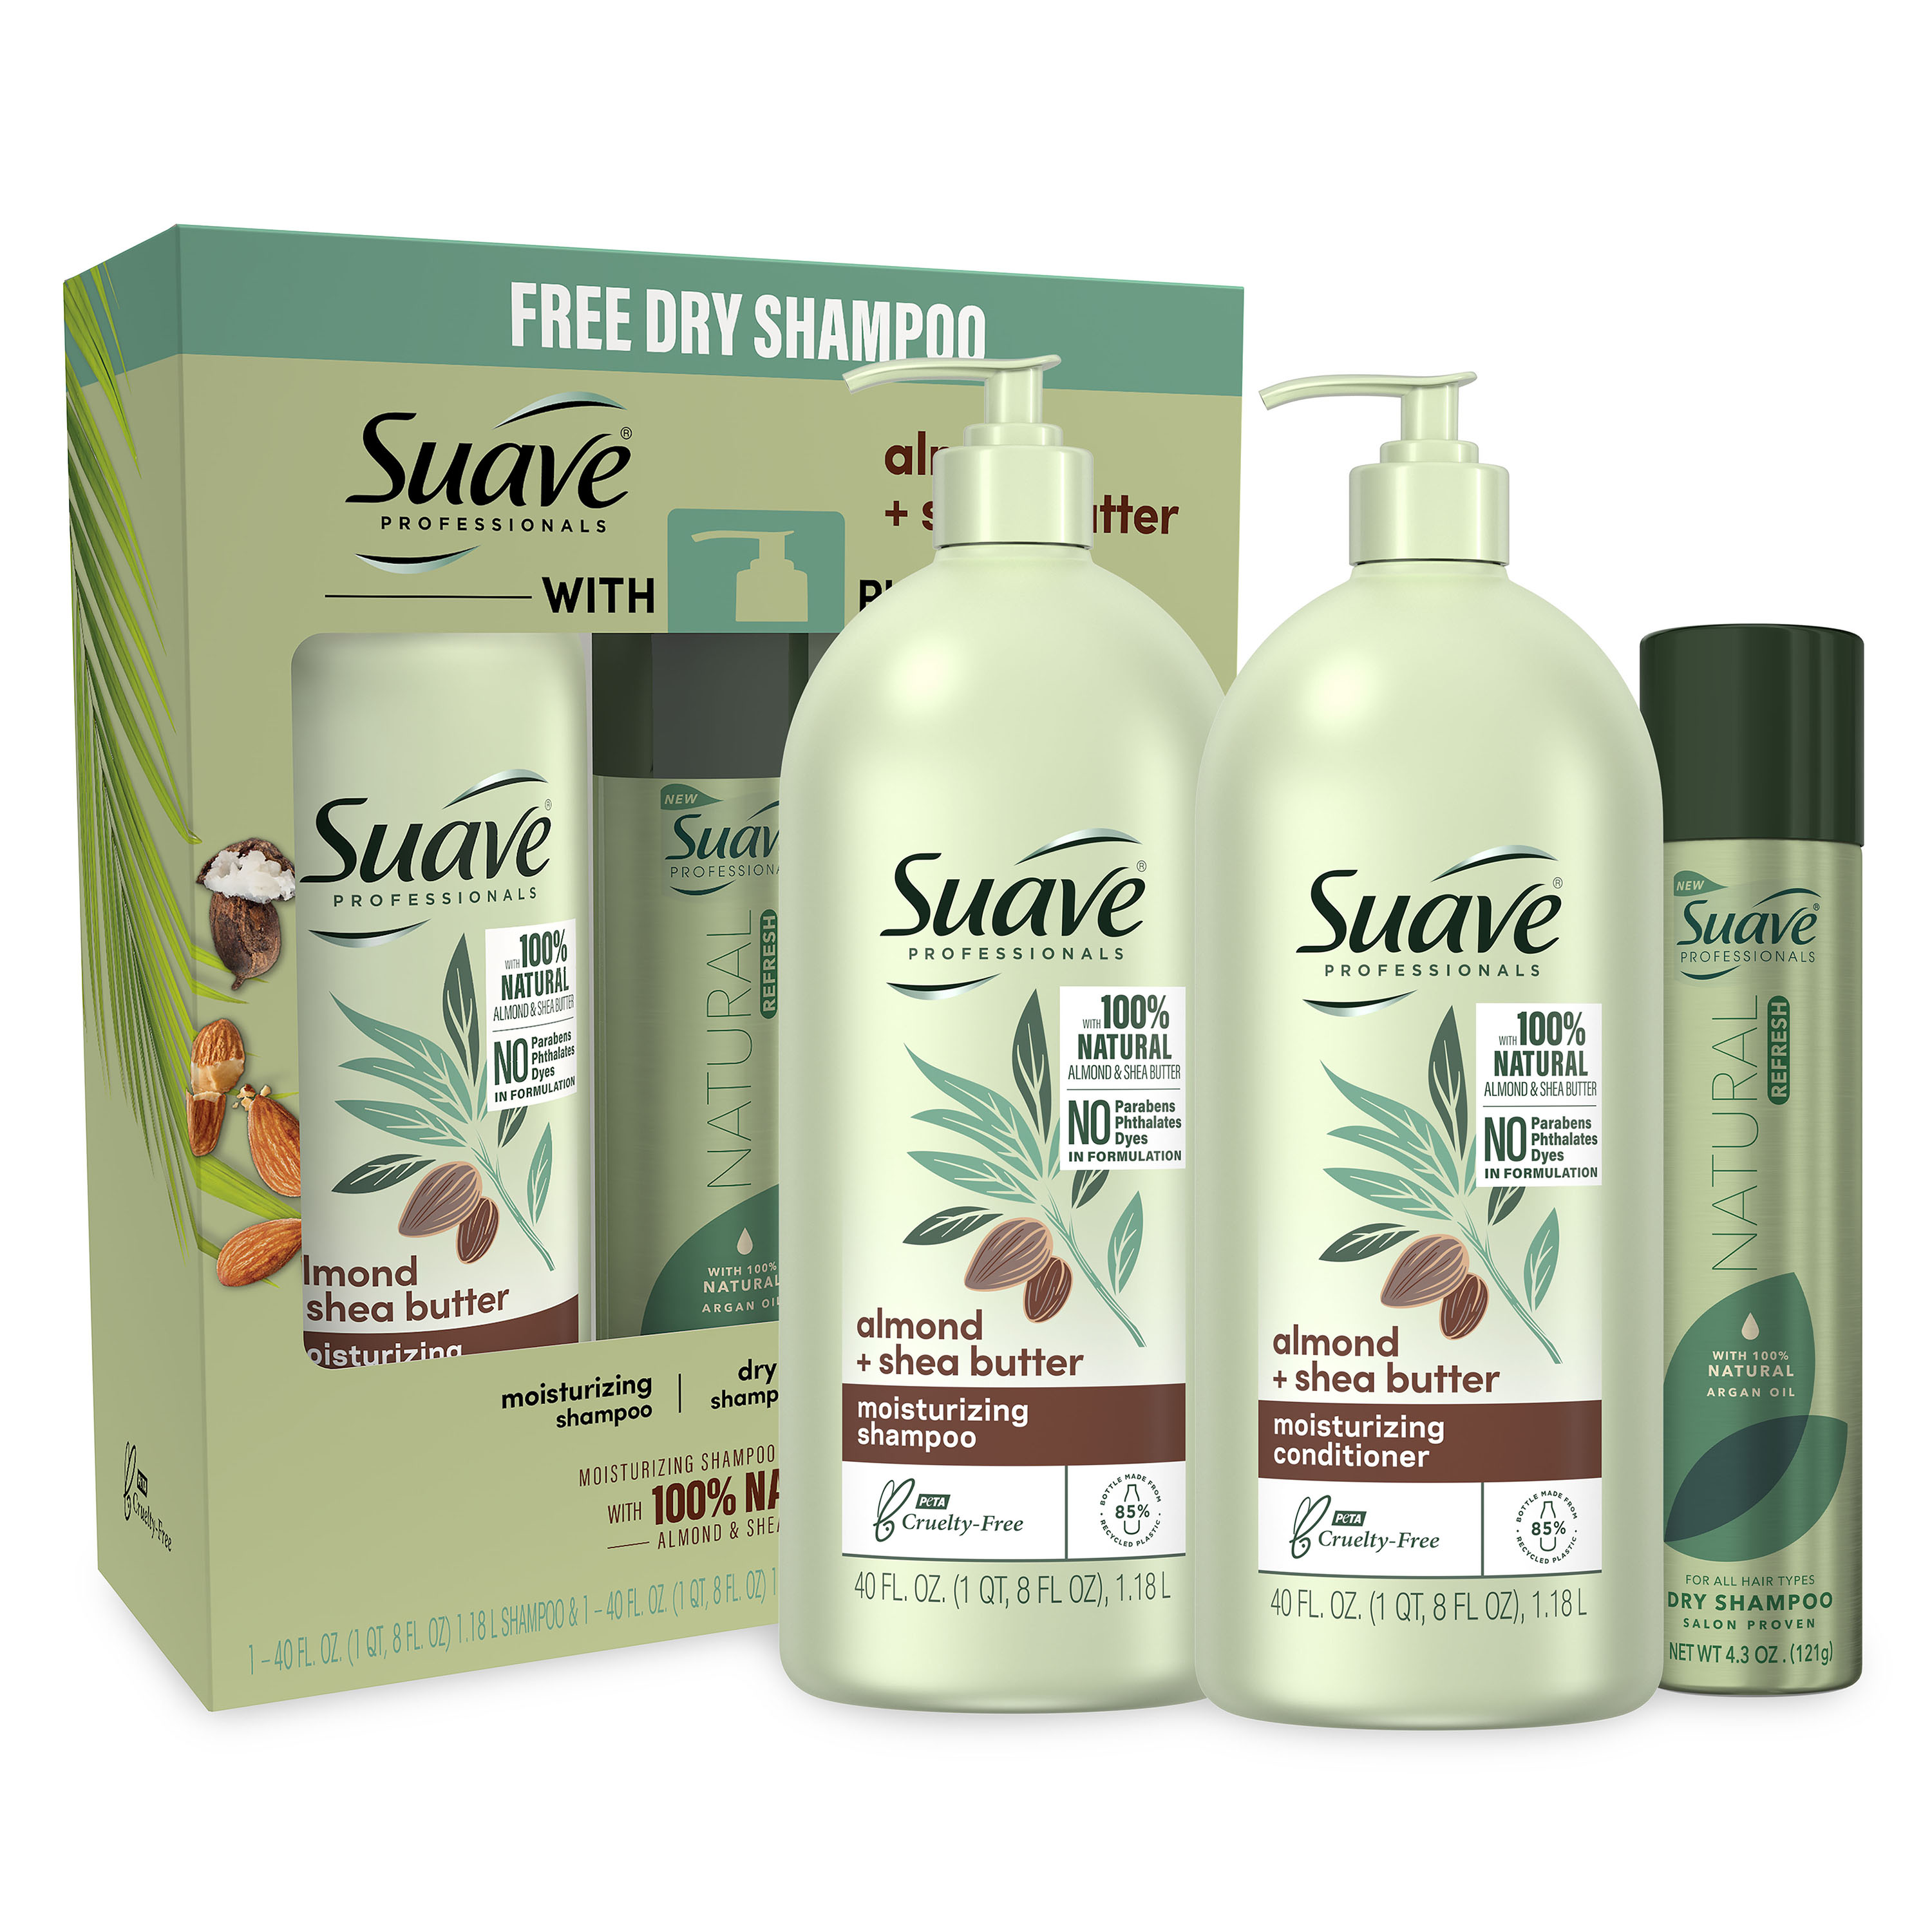 ($13 Value) Suave Professionals Shampoo and Conditioner Holiday Gift Set, Almond and Shea Butter, 3 Piece - image 1 of 5